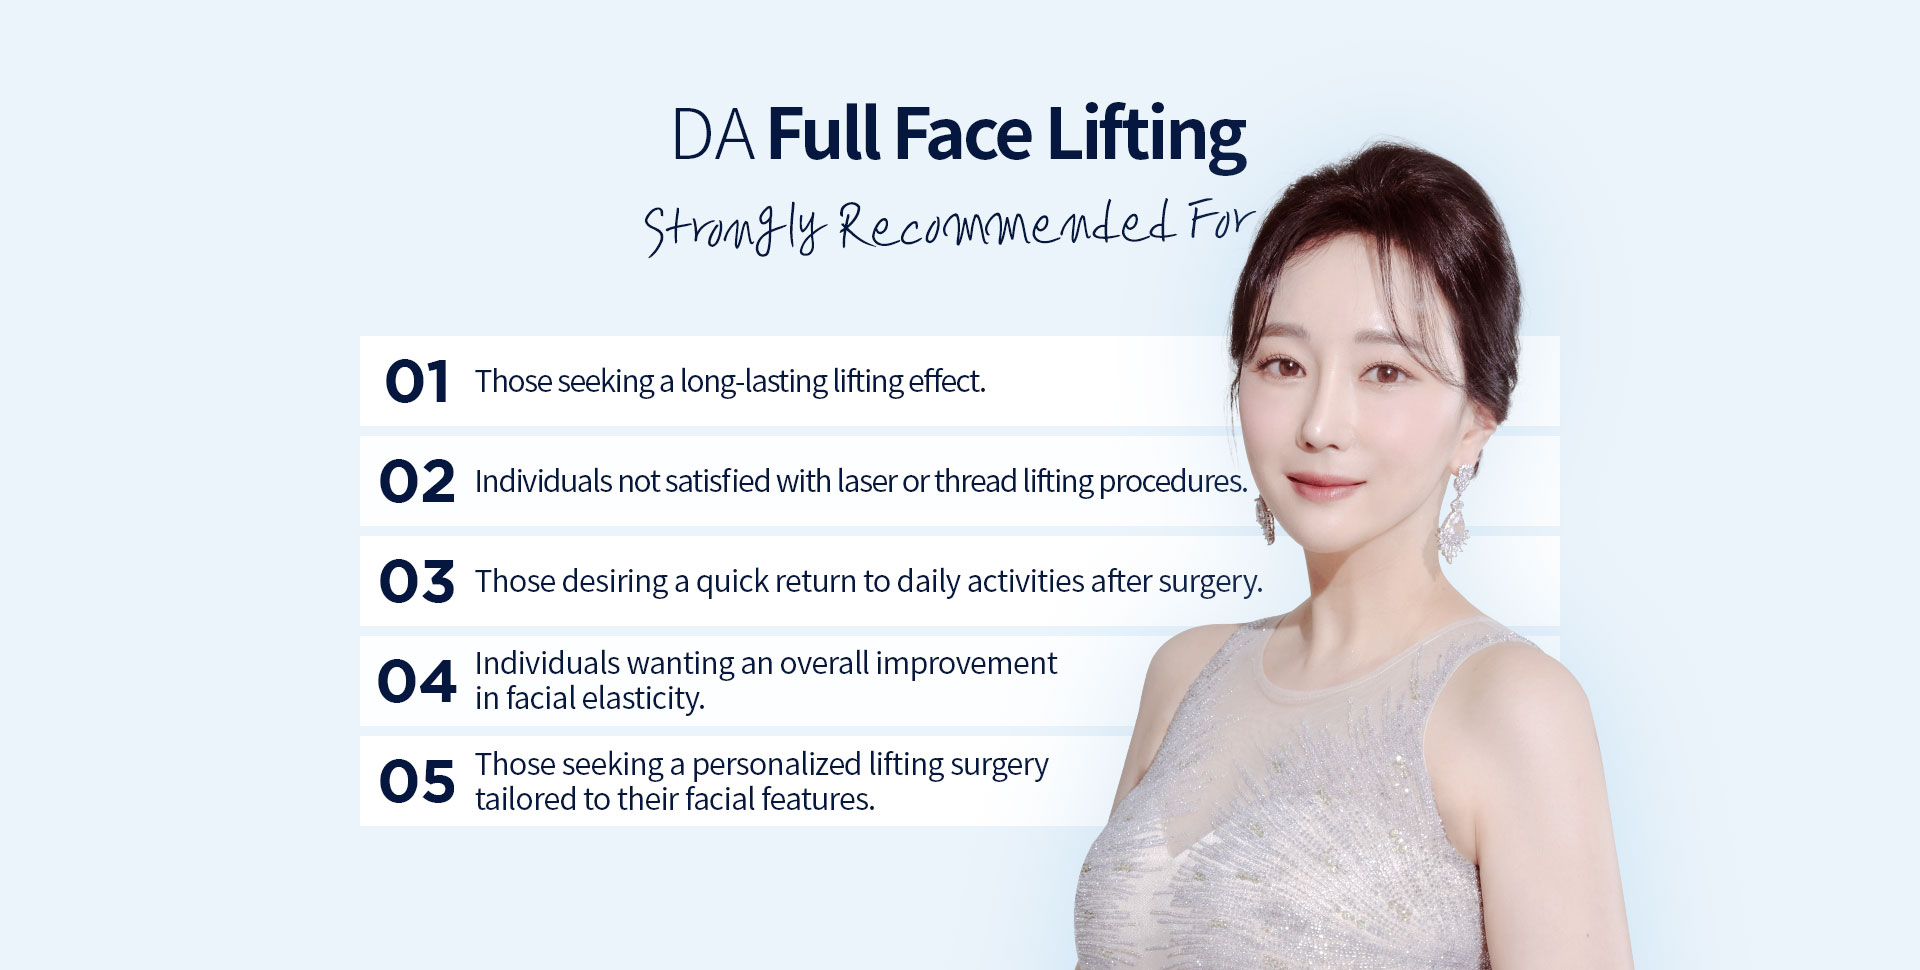 DA Full Face Lifting Strongly recommended